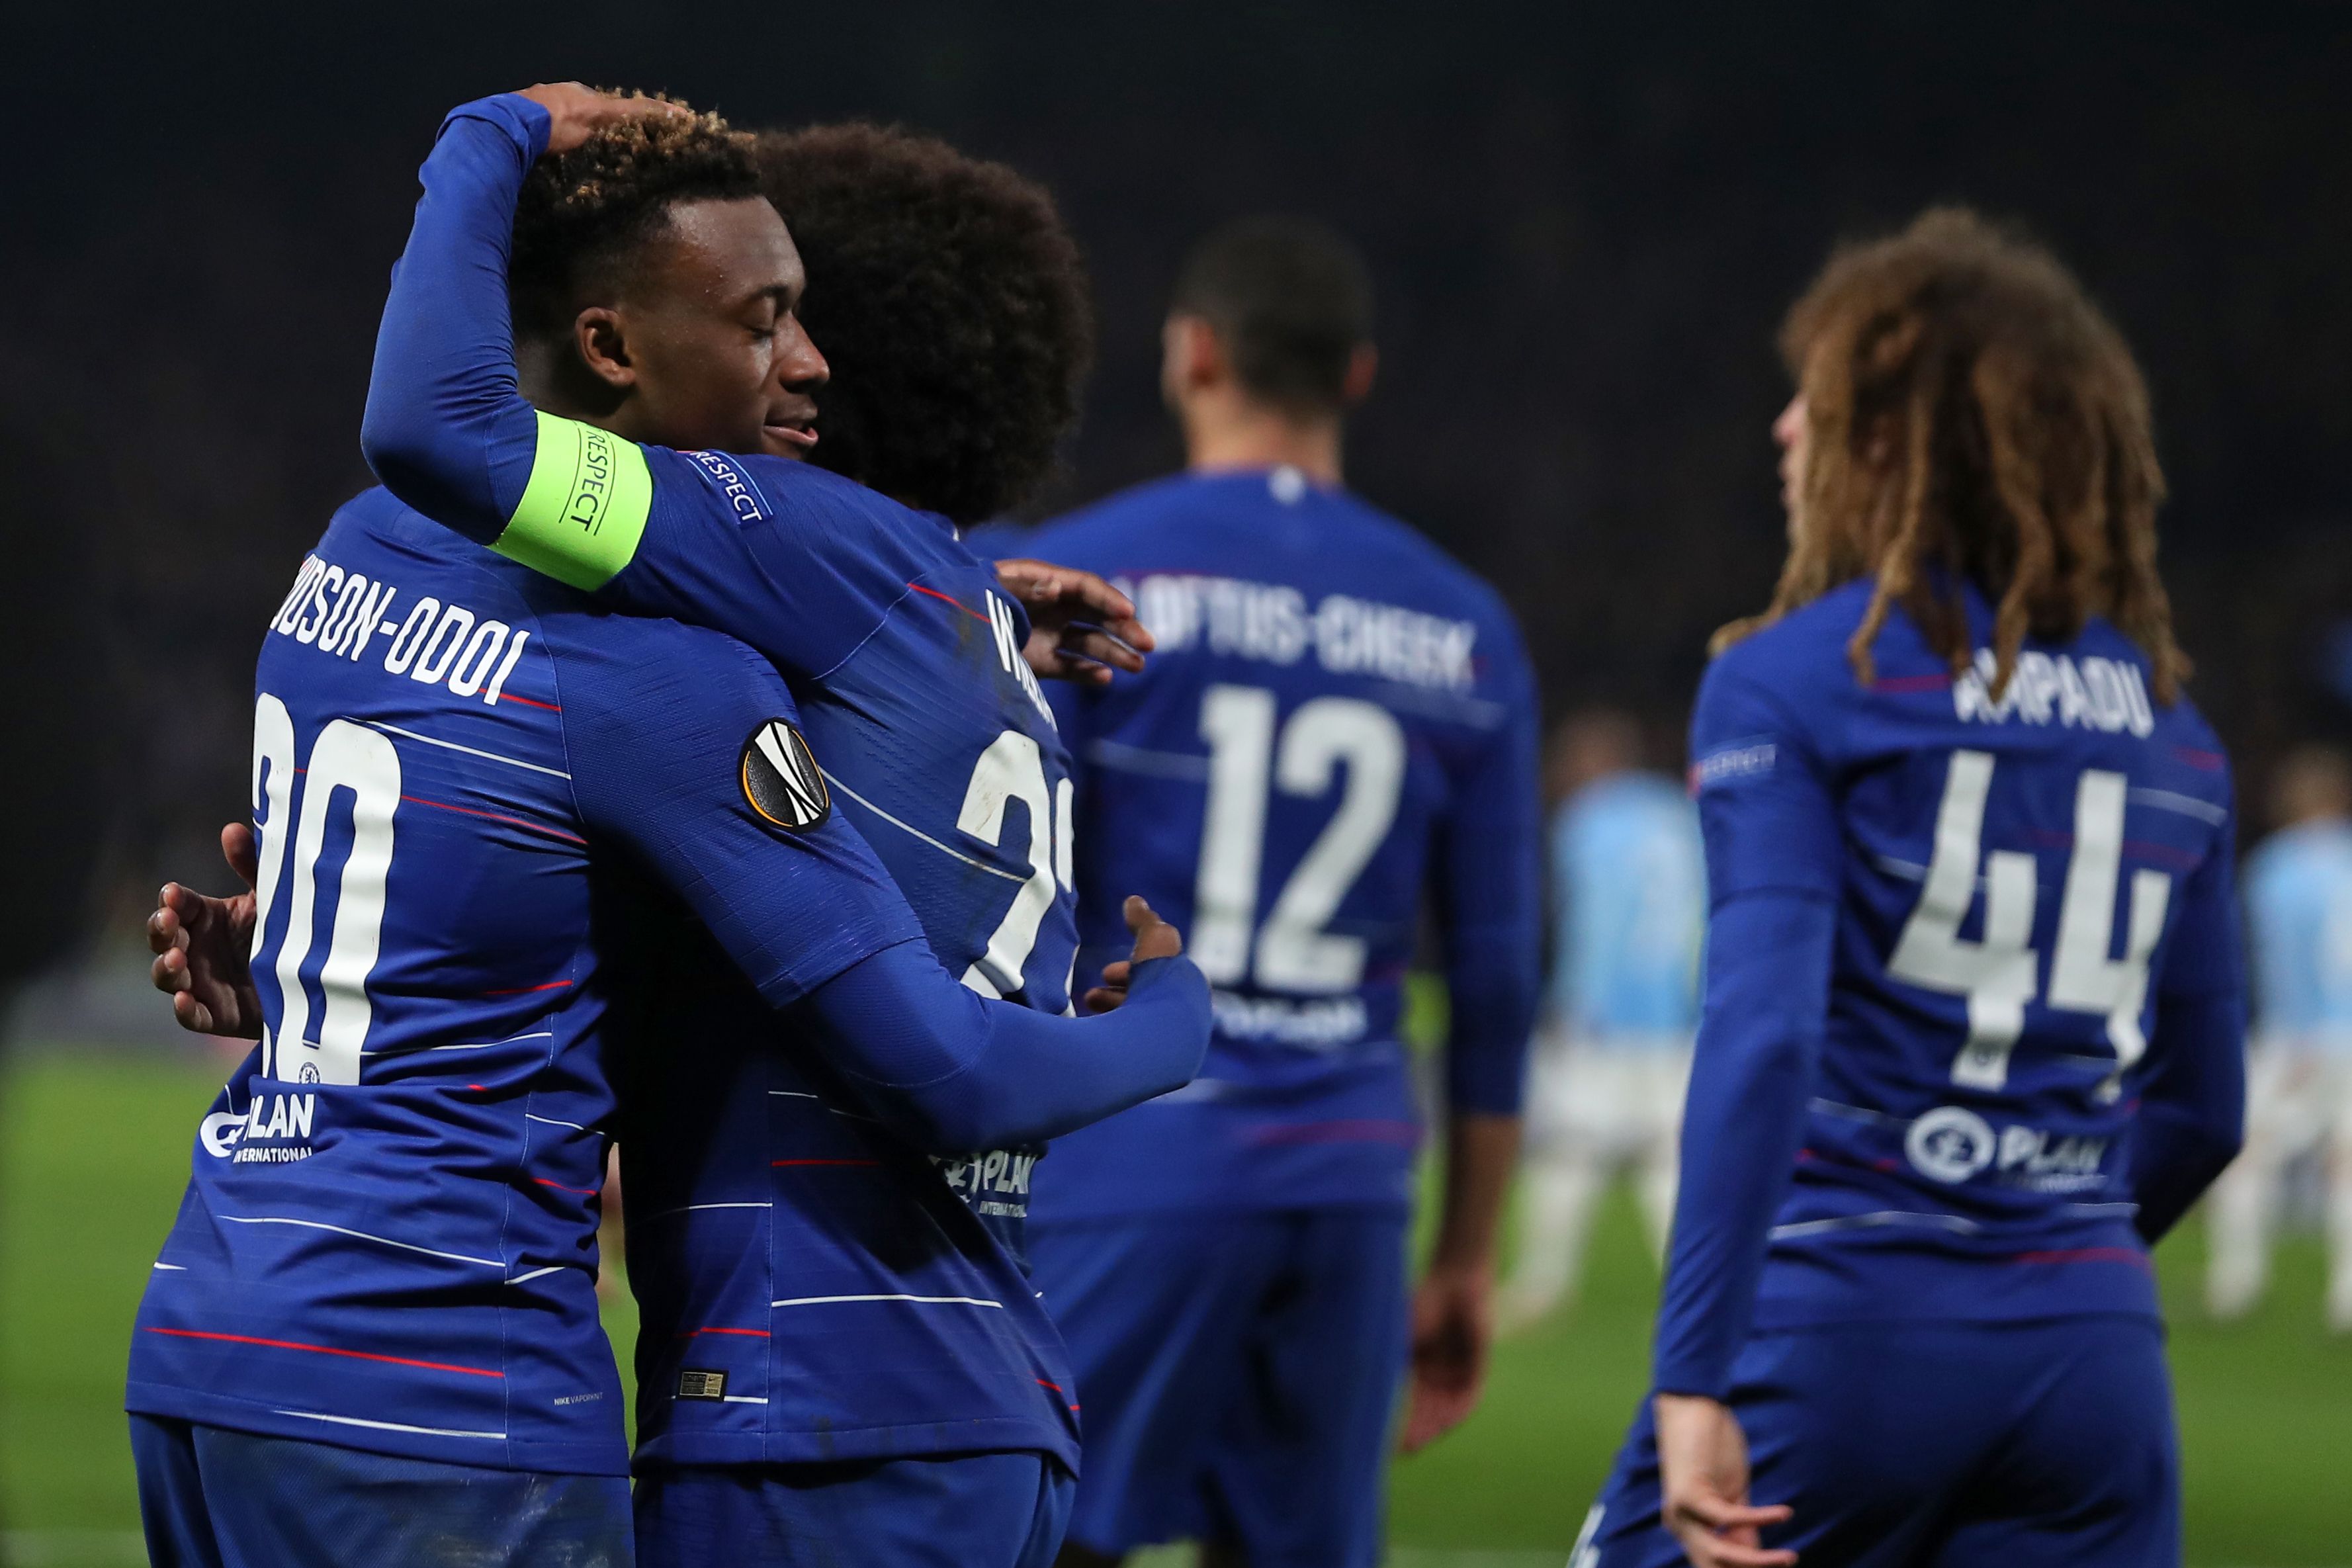 Chelsea's English midfielder Callum Hudson-Odoi (L) celebrates with teammates after scoring their third goal during the UEFA Europa League round of 32, 2nd leg football match between Chelsea and Malmo at Stamford Bridge in London on February 21, 2019. (Photo by Daniel LEAL-OLIVAS / AFP)        (Photo credit should read DANIEL LEAL-OLIVAS/AFP/Getty Images)